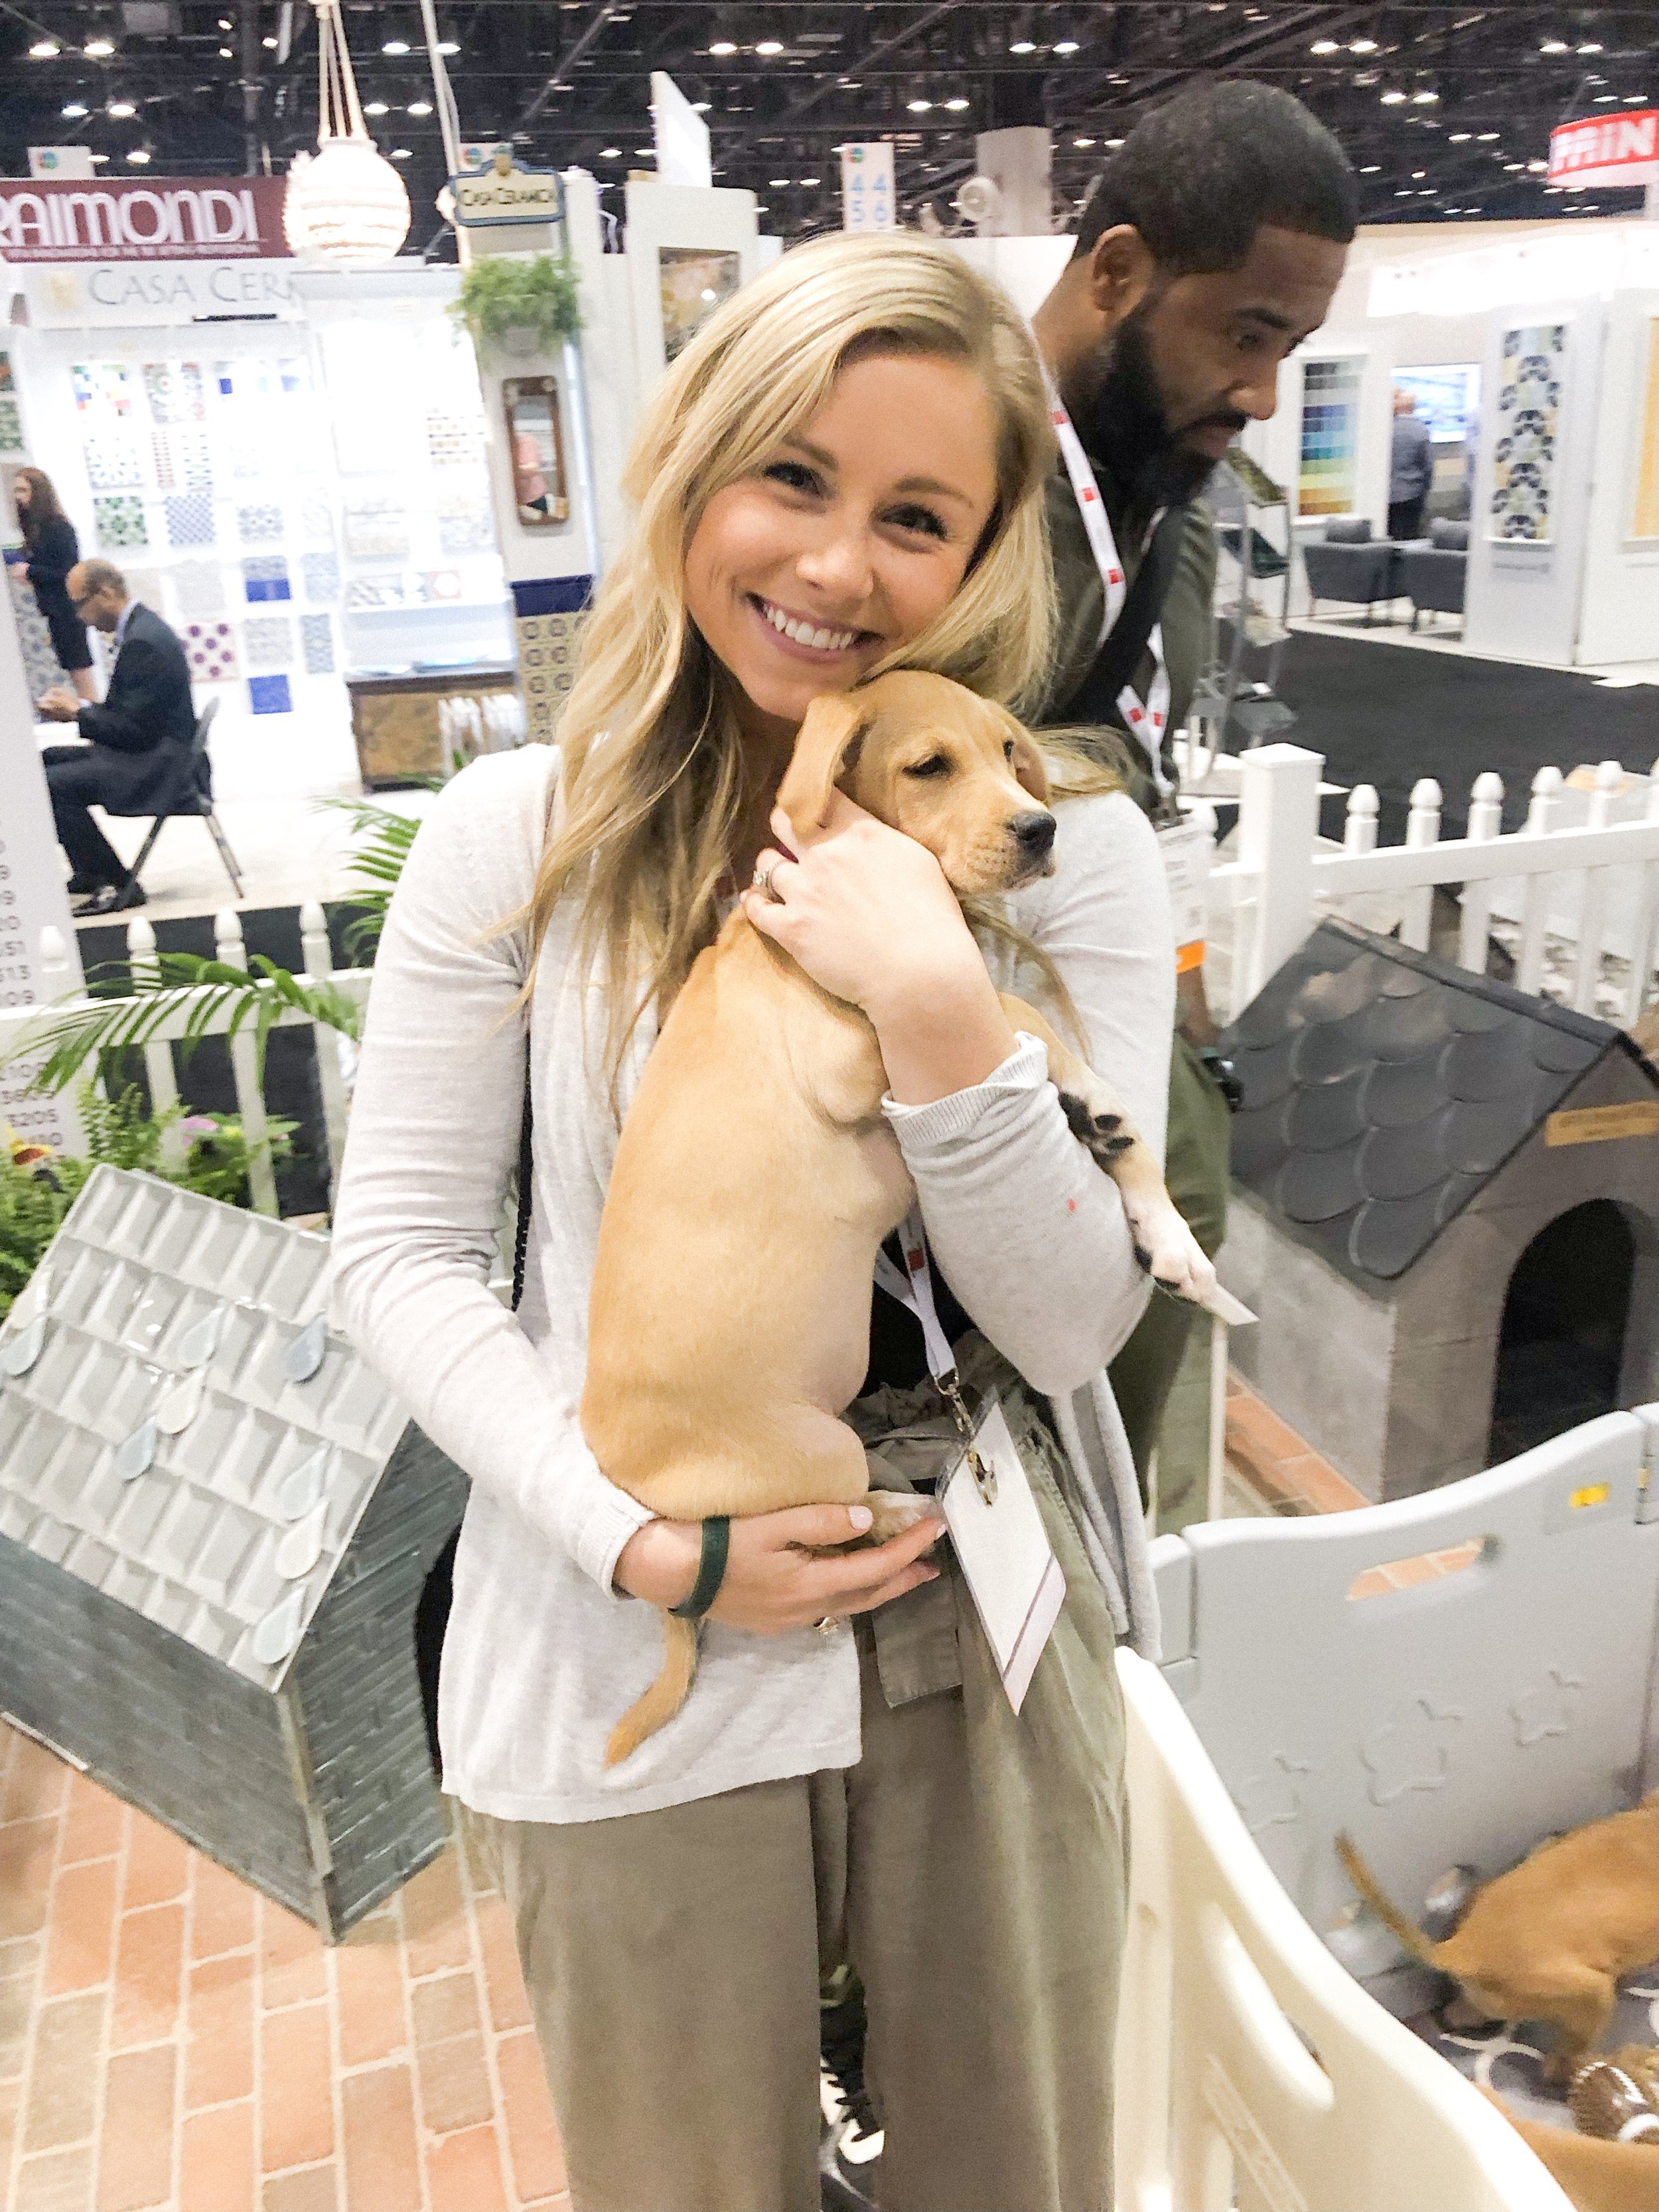 &amp; there were puppies!! Tile Council of North America does a great exhibit every year where they have members create dog houses that will be donated to local animal shelters AND they have puppies on site that you can adopt!